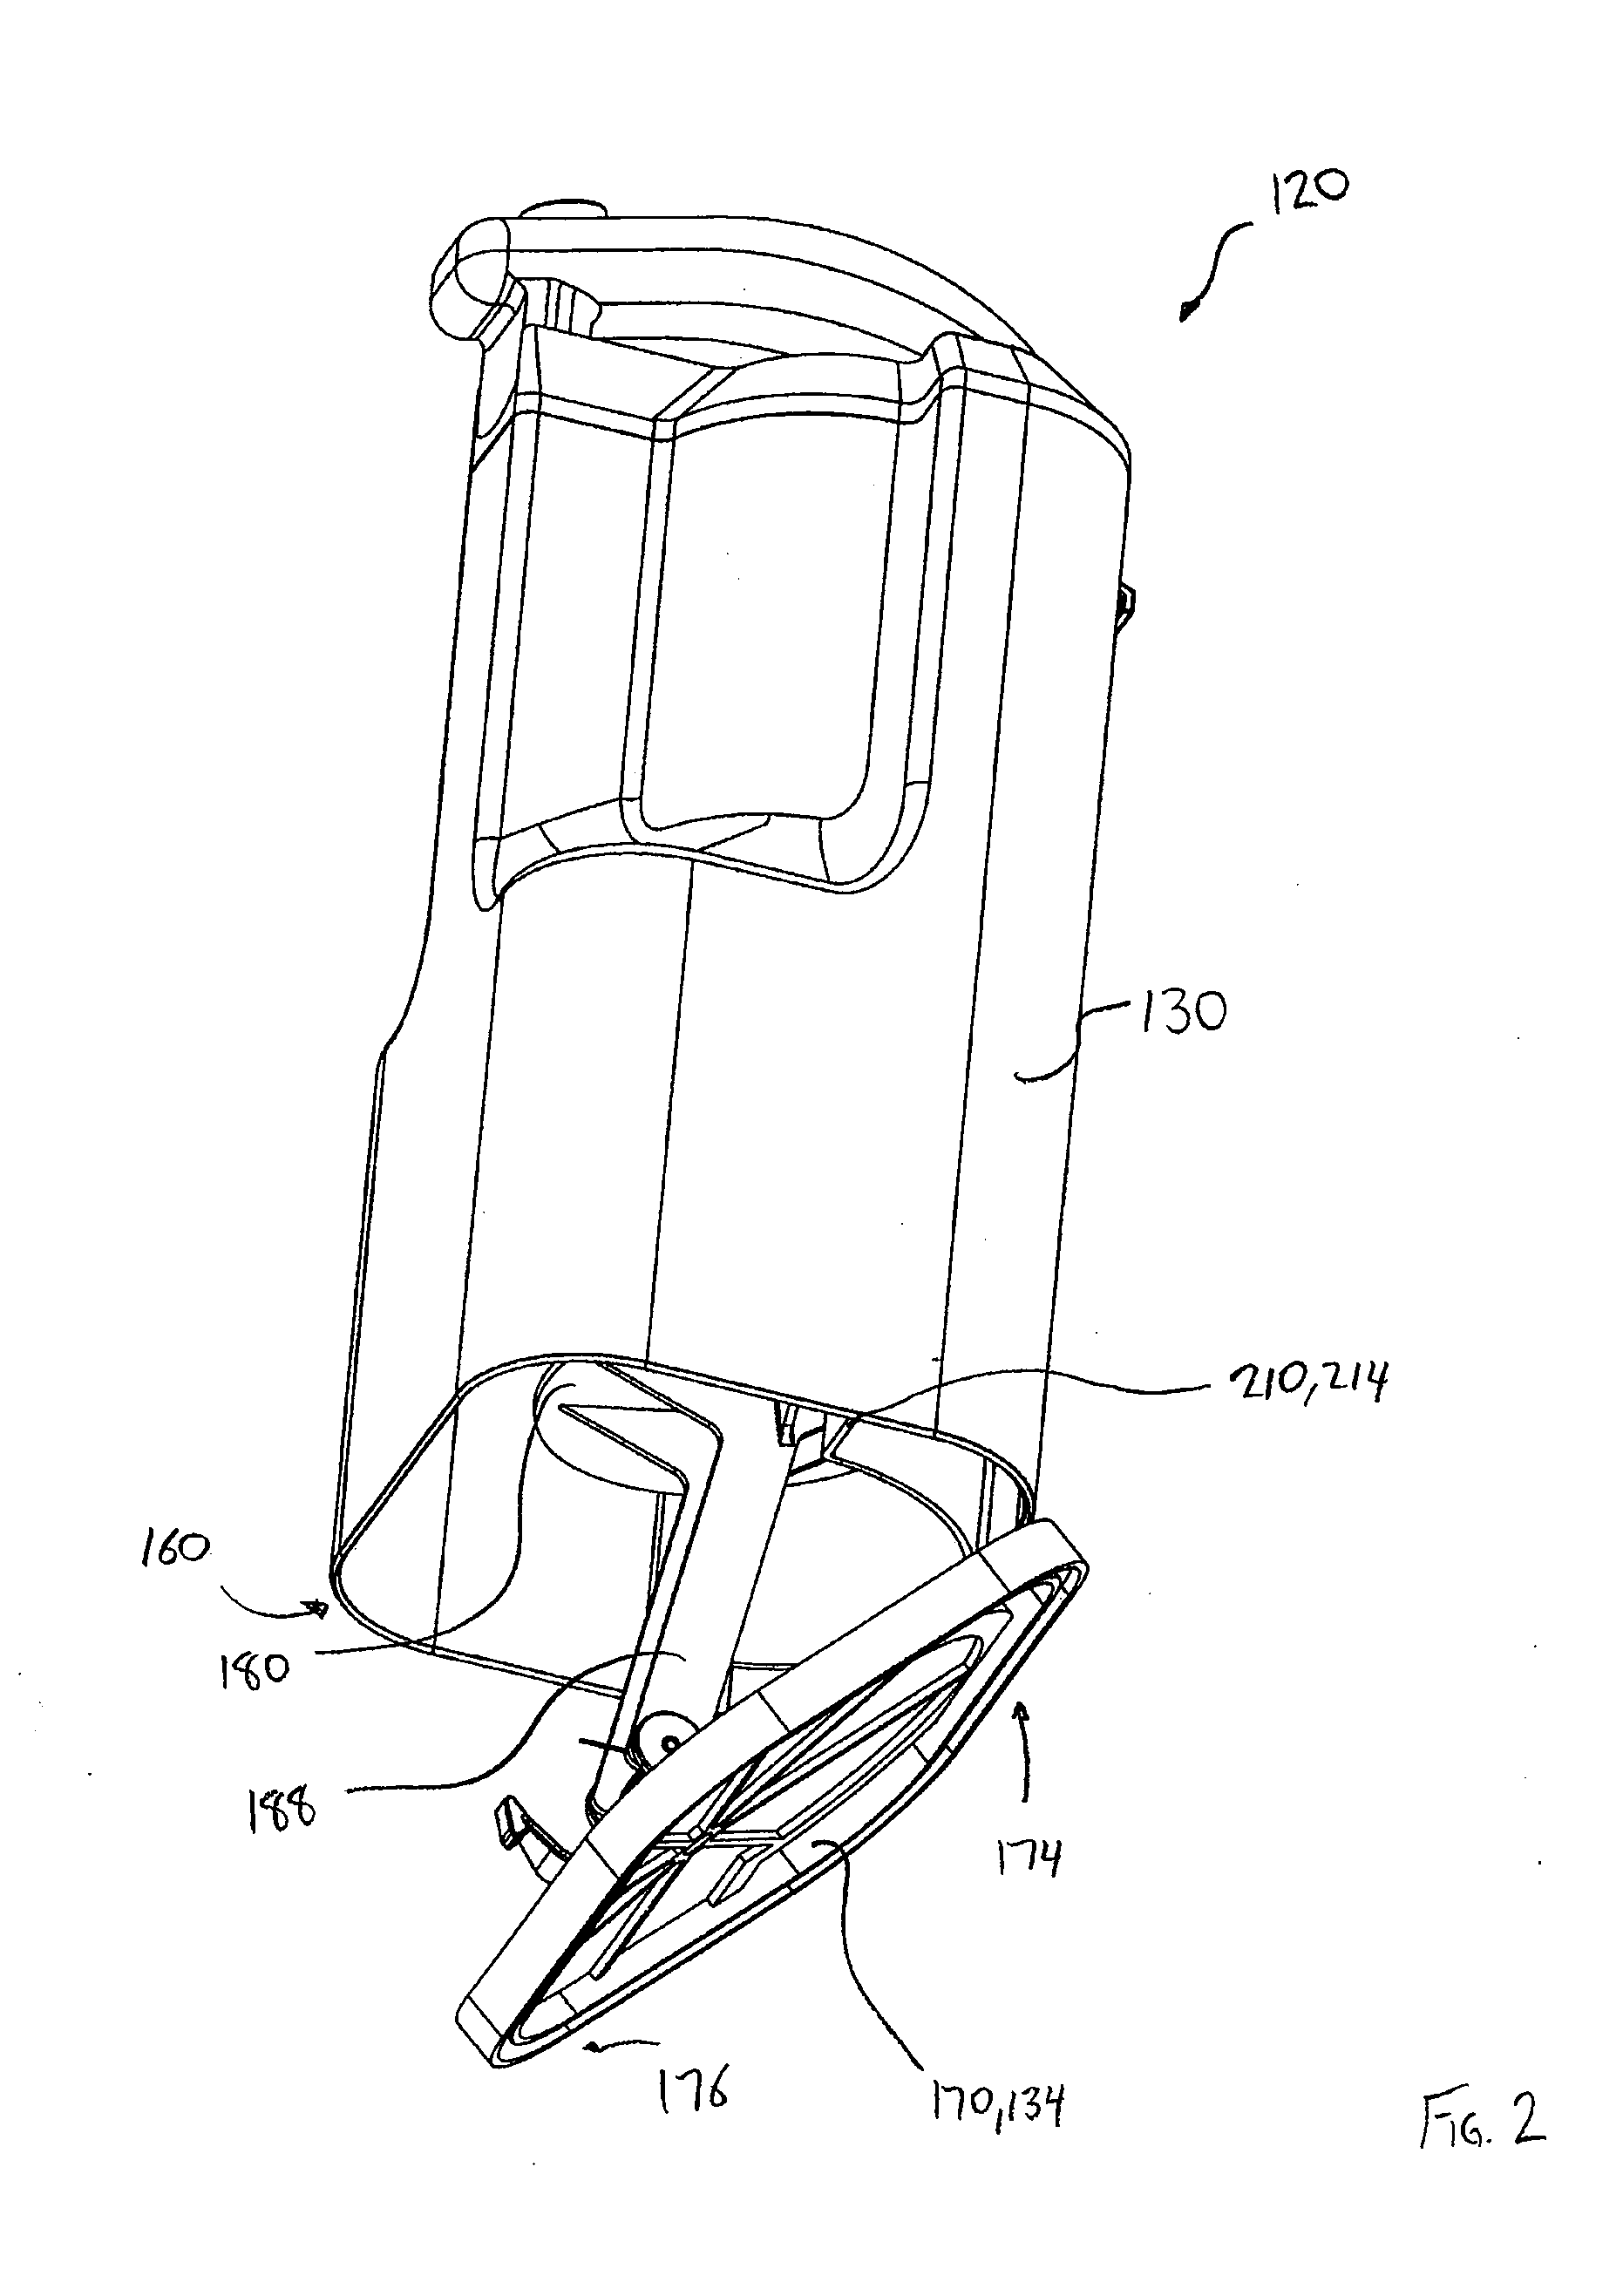 Cyclone Construction for a Surface Cleaning Apparatus